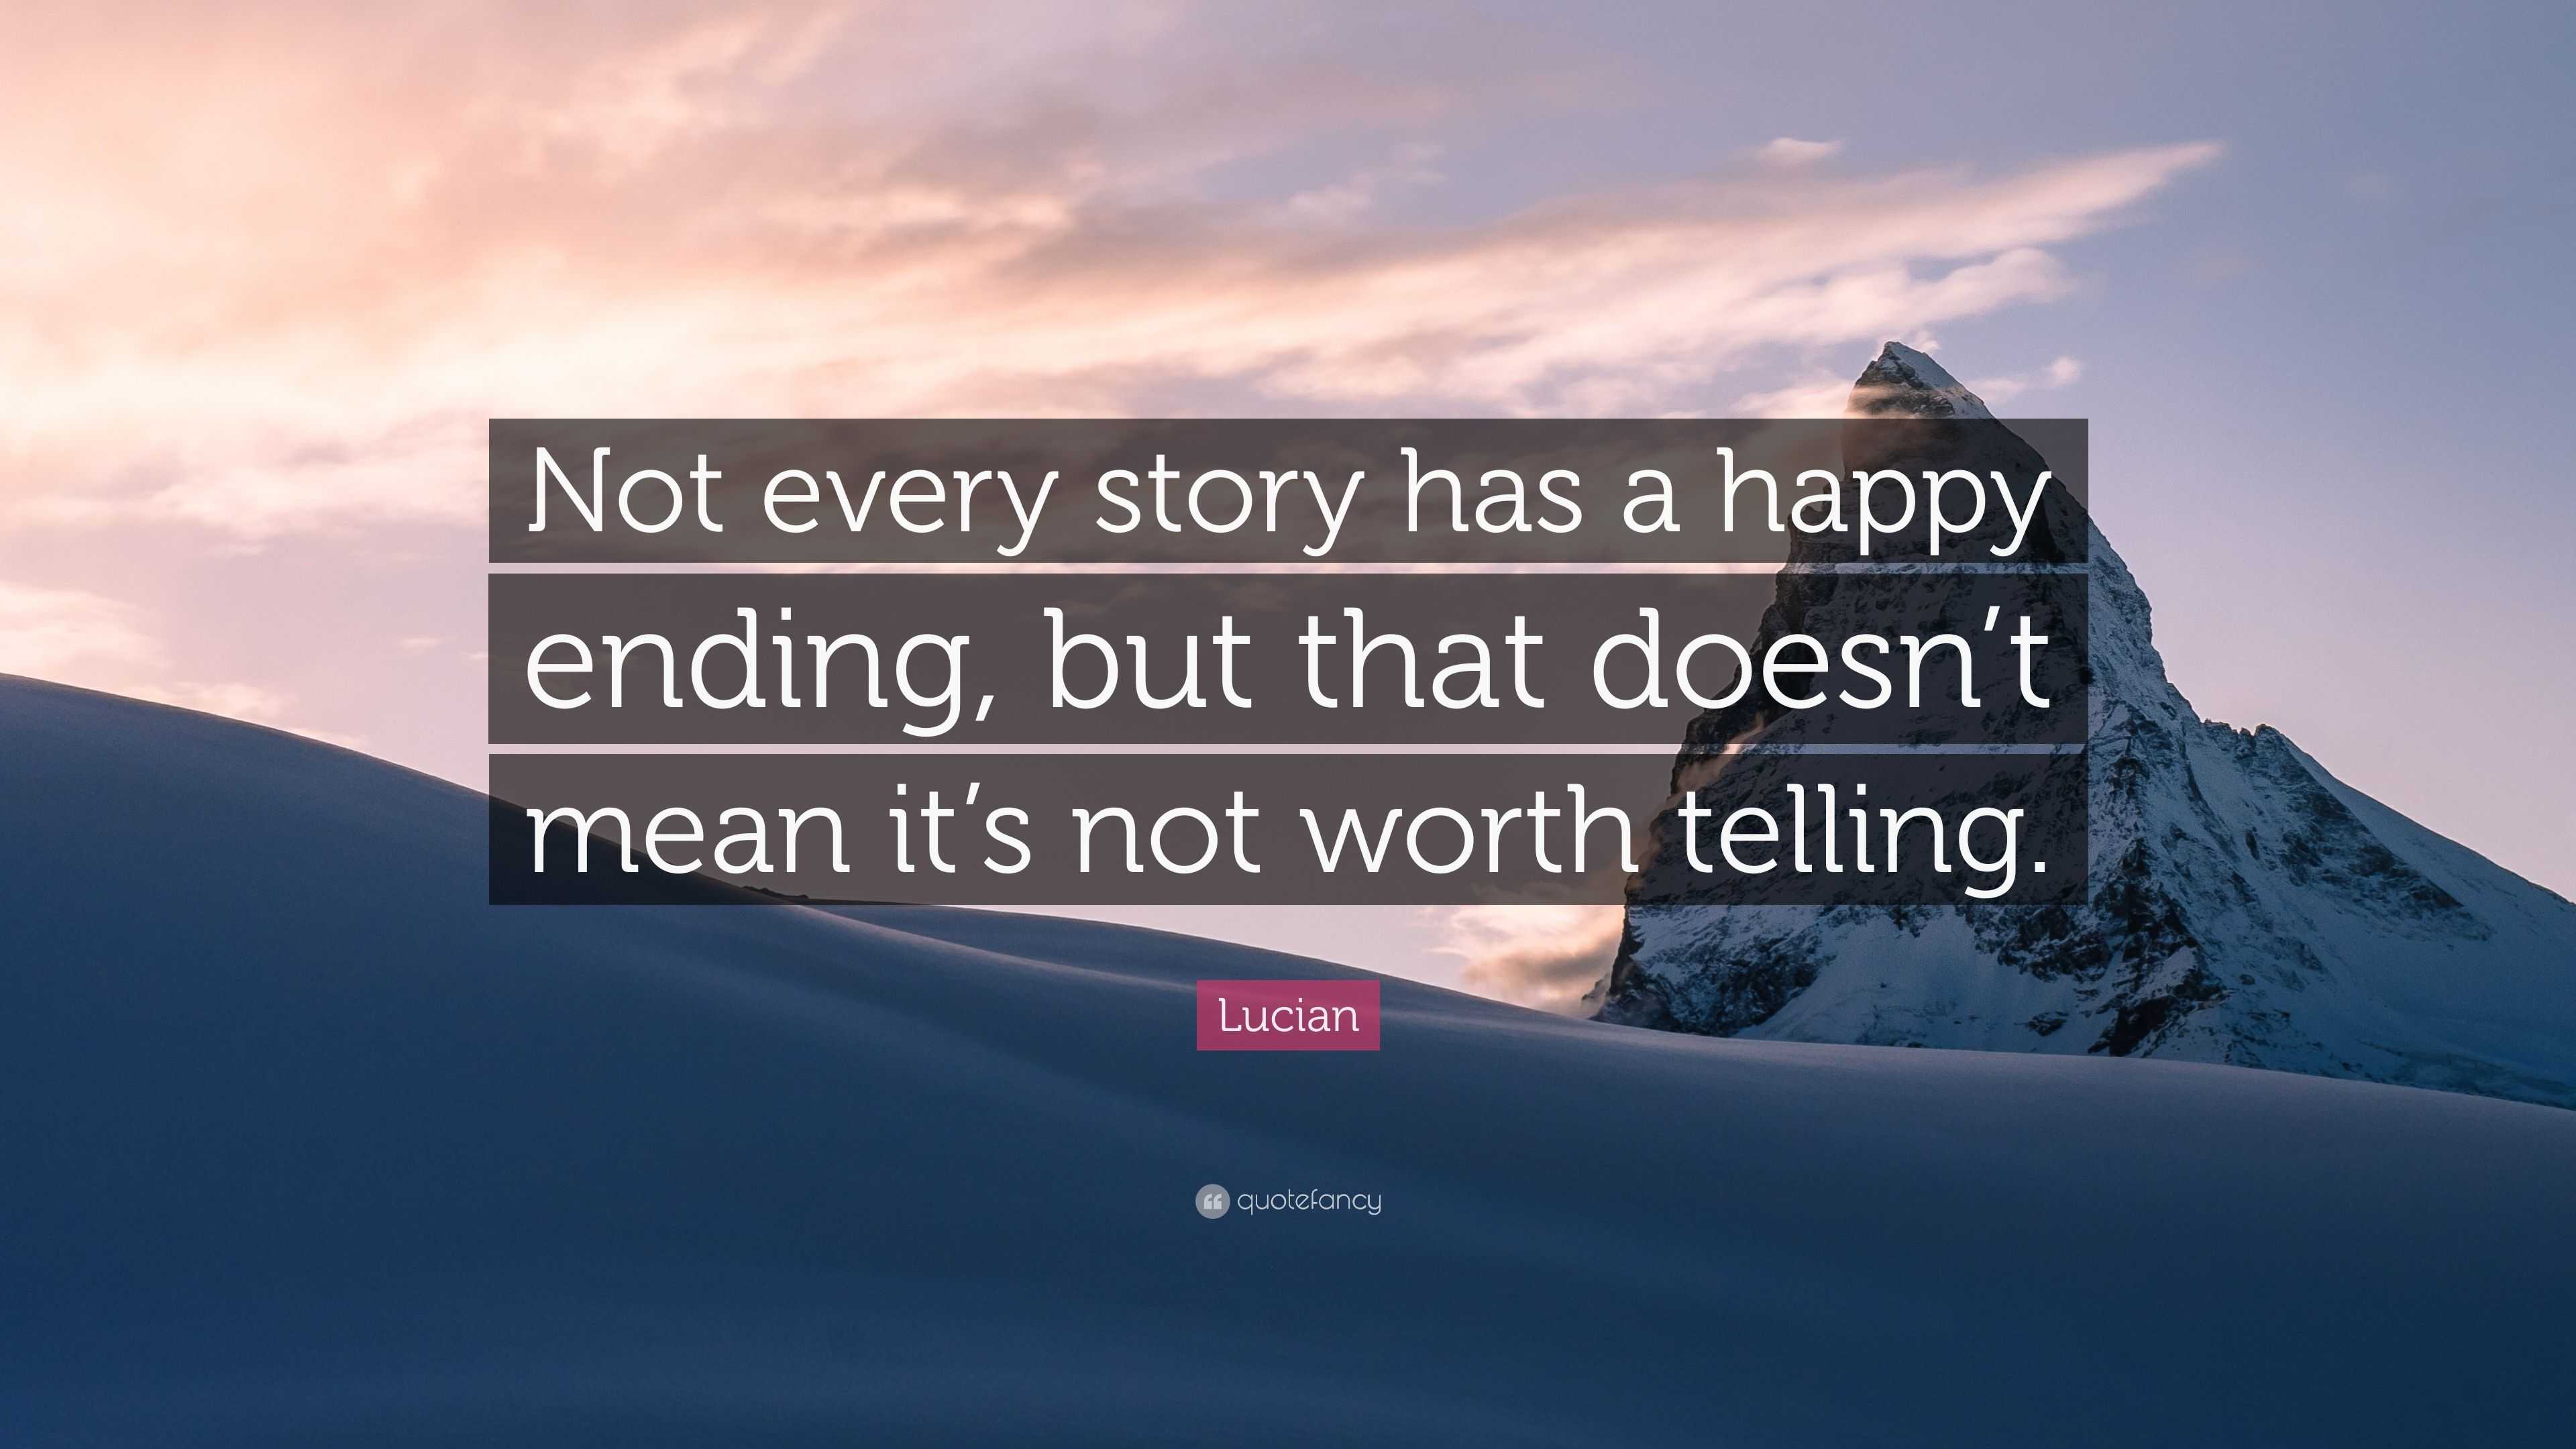 Entrepreneur's Worth: Not All Stories End Happy